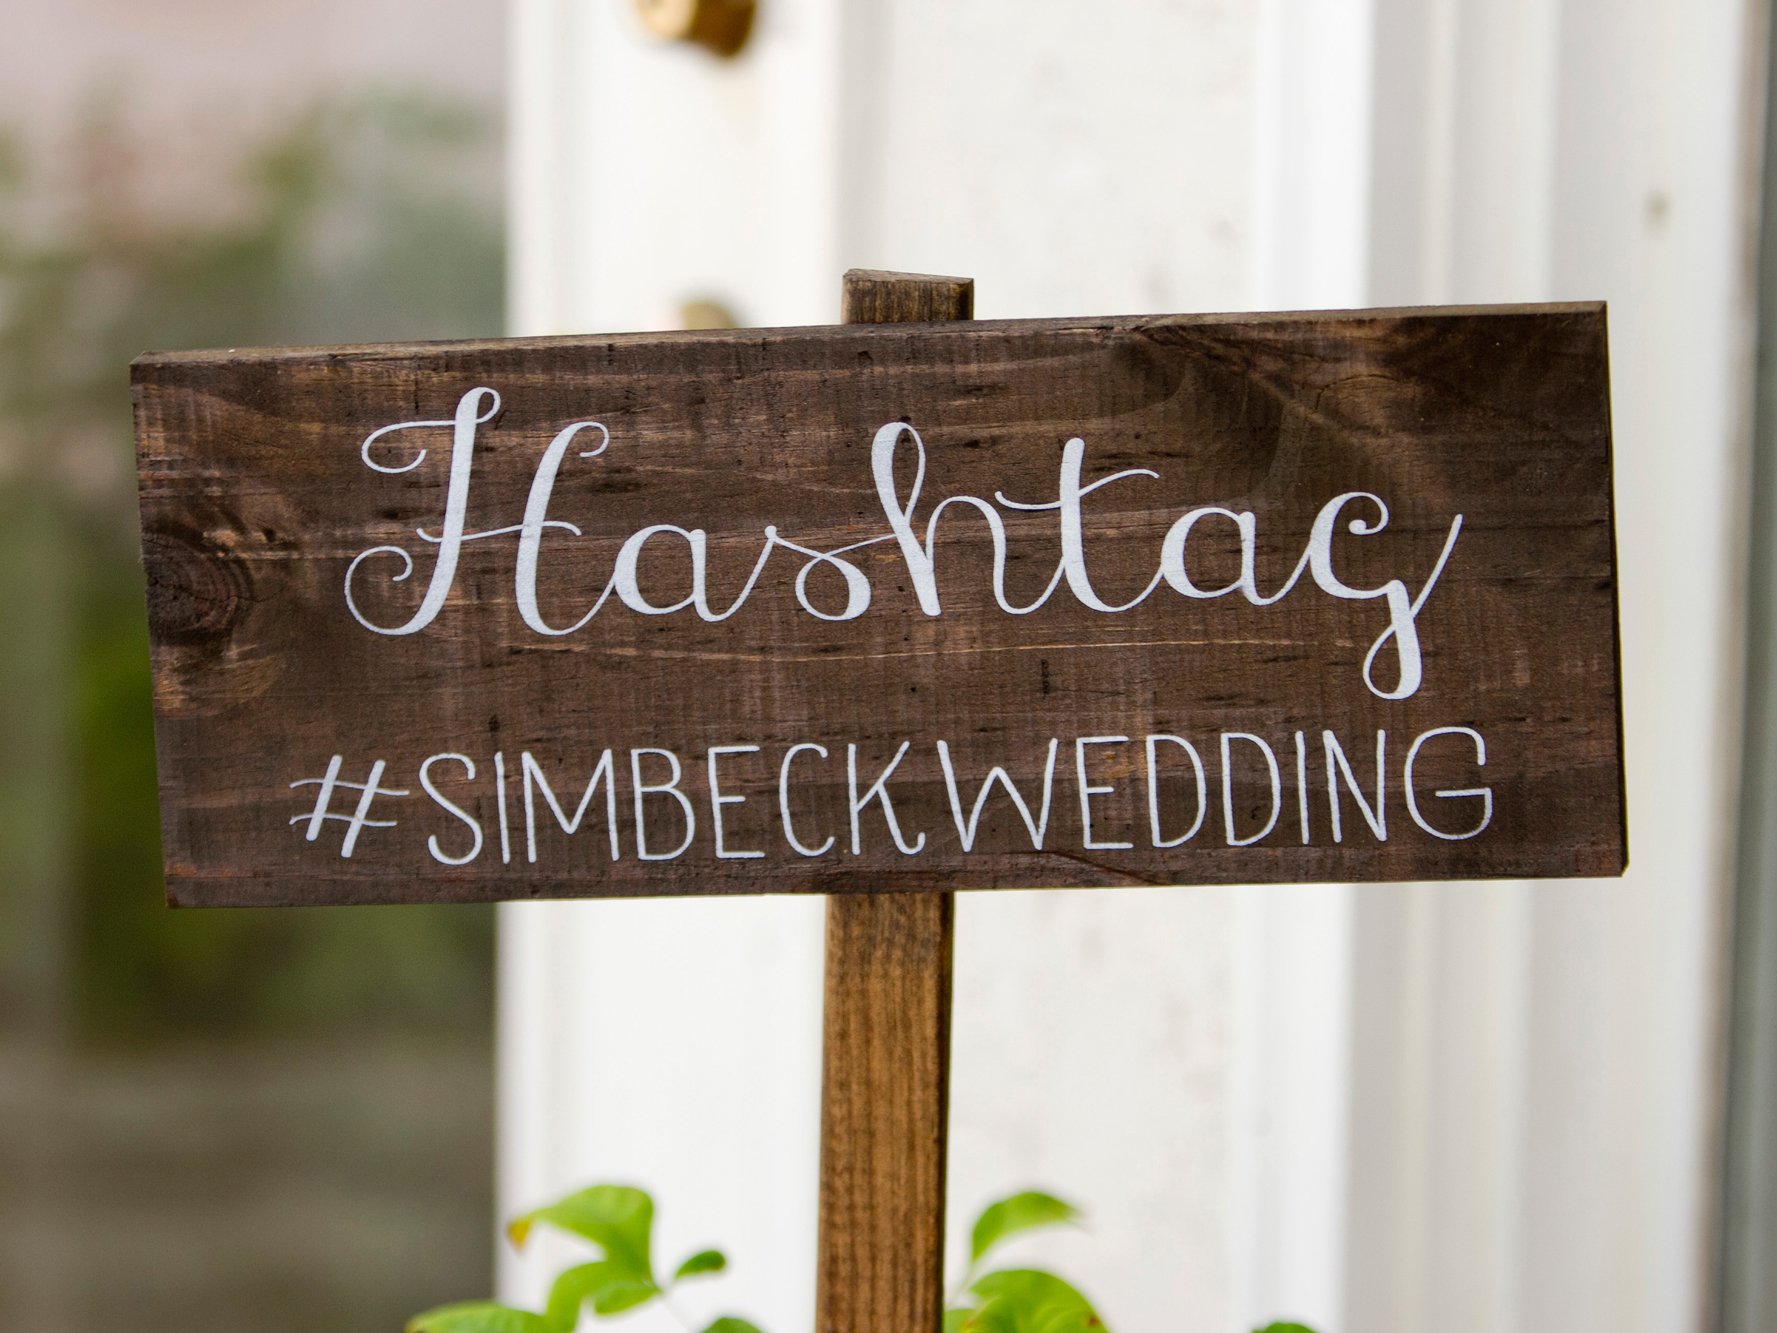 How to Come Up With The Best Wedding Hashtag Ever?